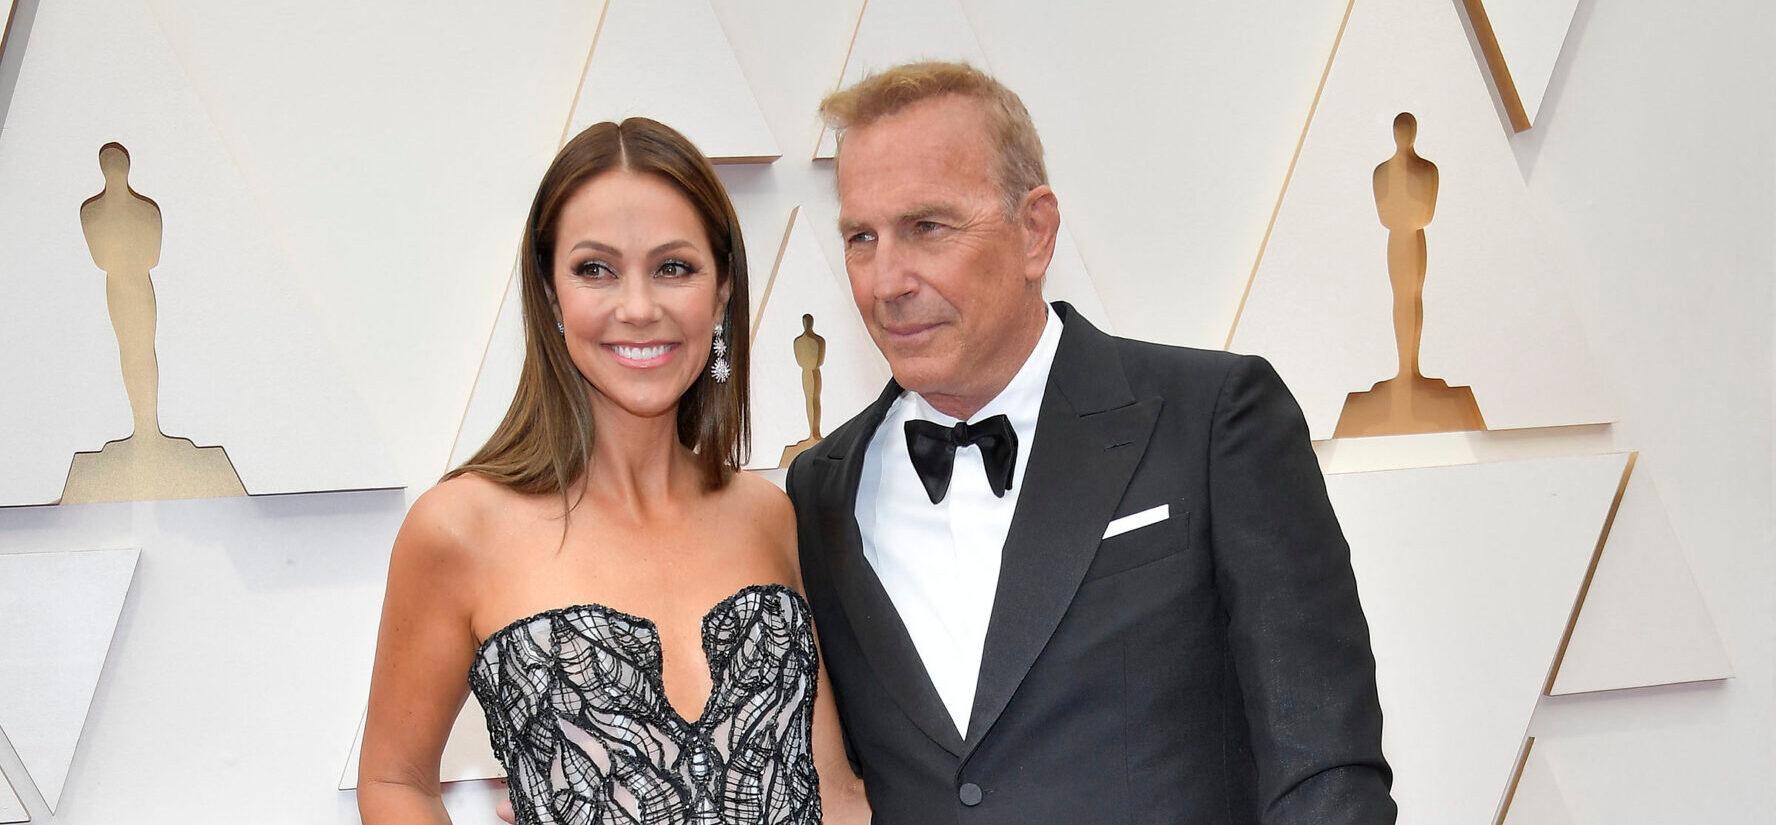 Kevin Costner Ordered To Pay Half Of Estranged Wife’s Request In Child Support